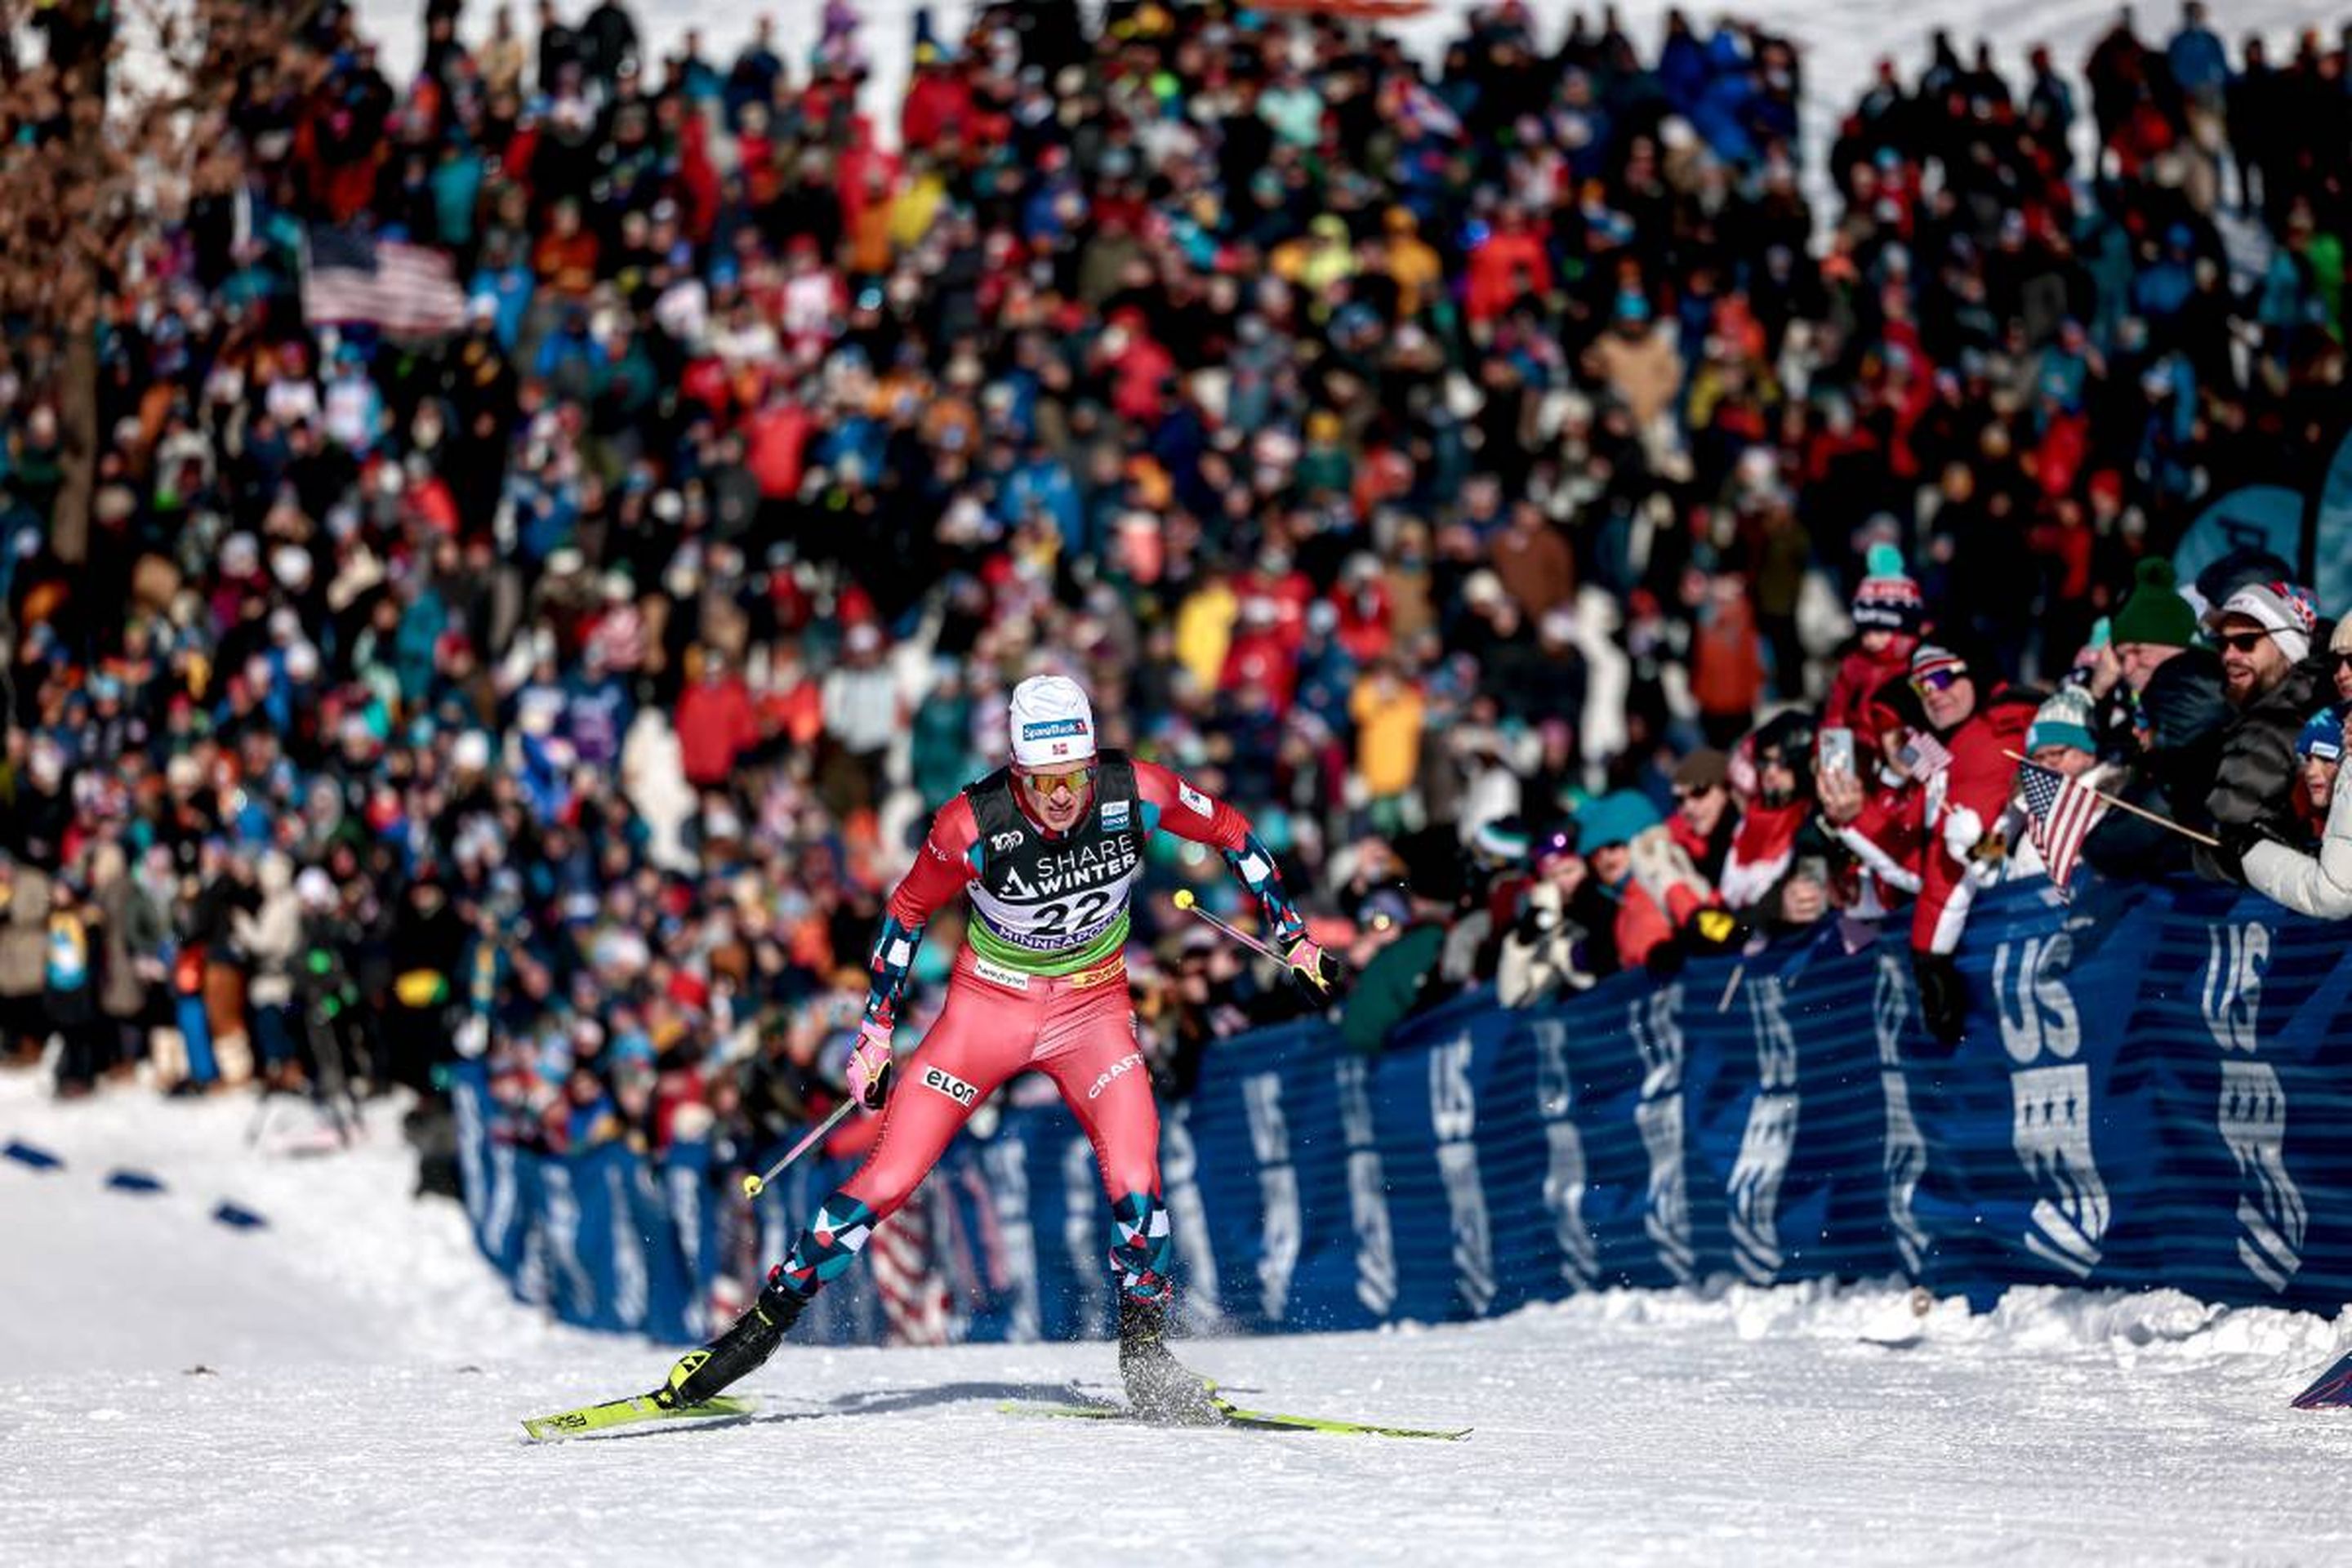 A king's welcome: Klaebo wows the crowds in Minneapolis with a fourth straight sprint win @ Nordic Focus